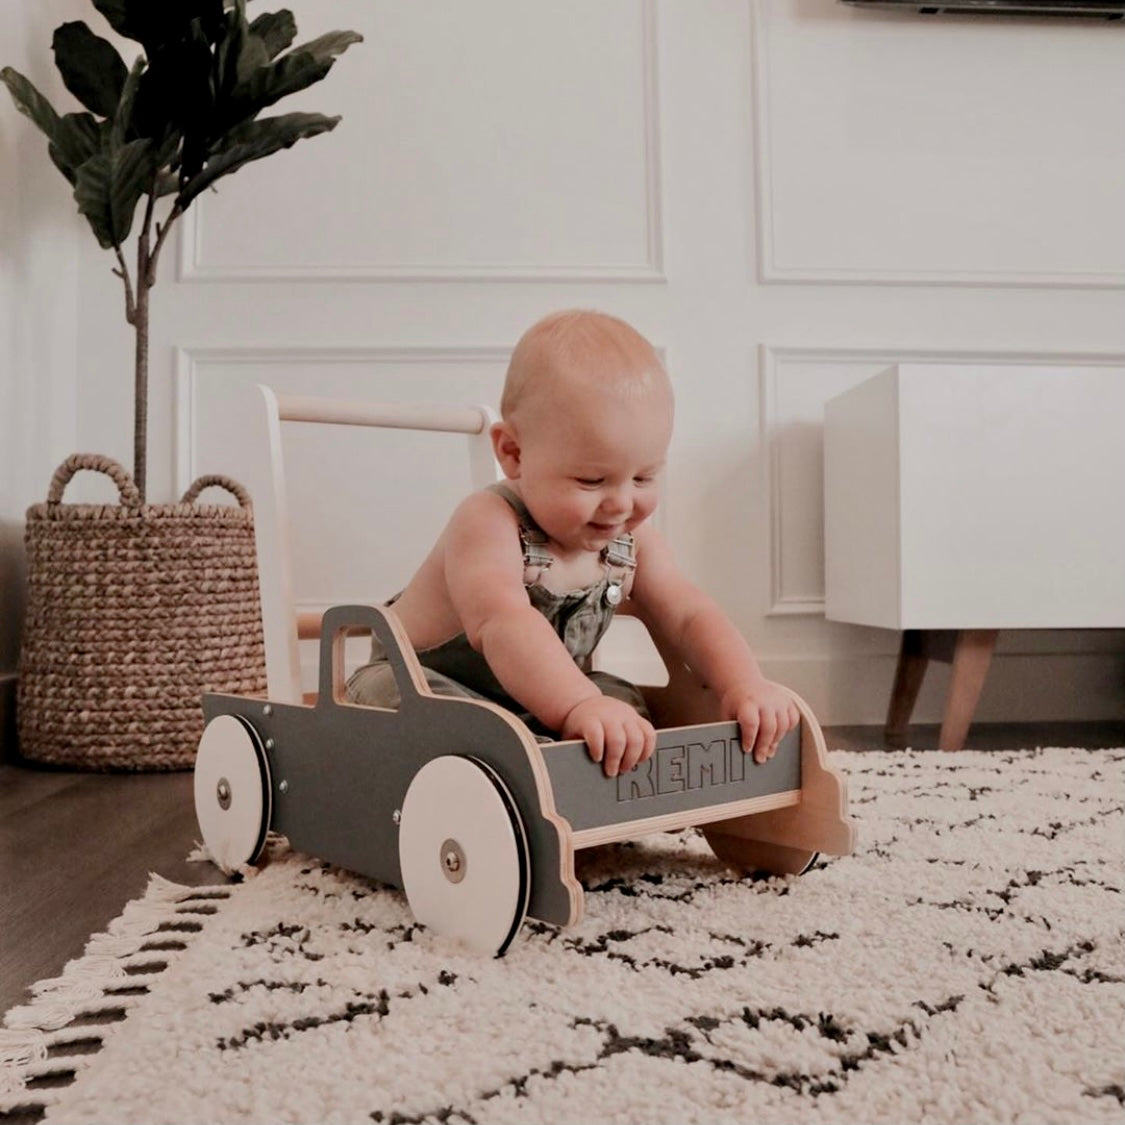 Luma Buggy: Charcoal Gray Truck Handcrafted Baby Wooden Push Walker Cart